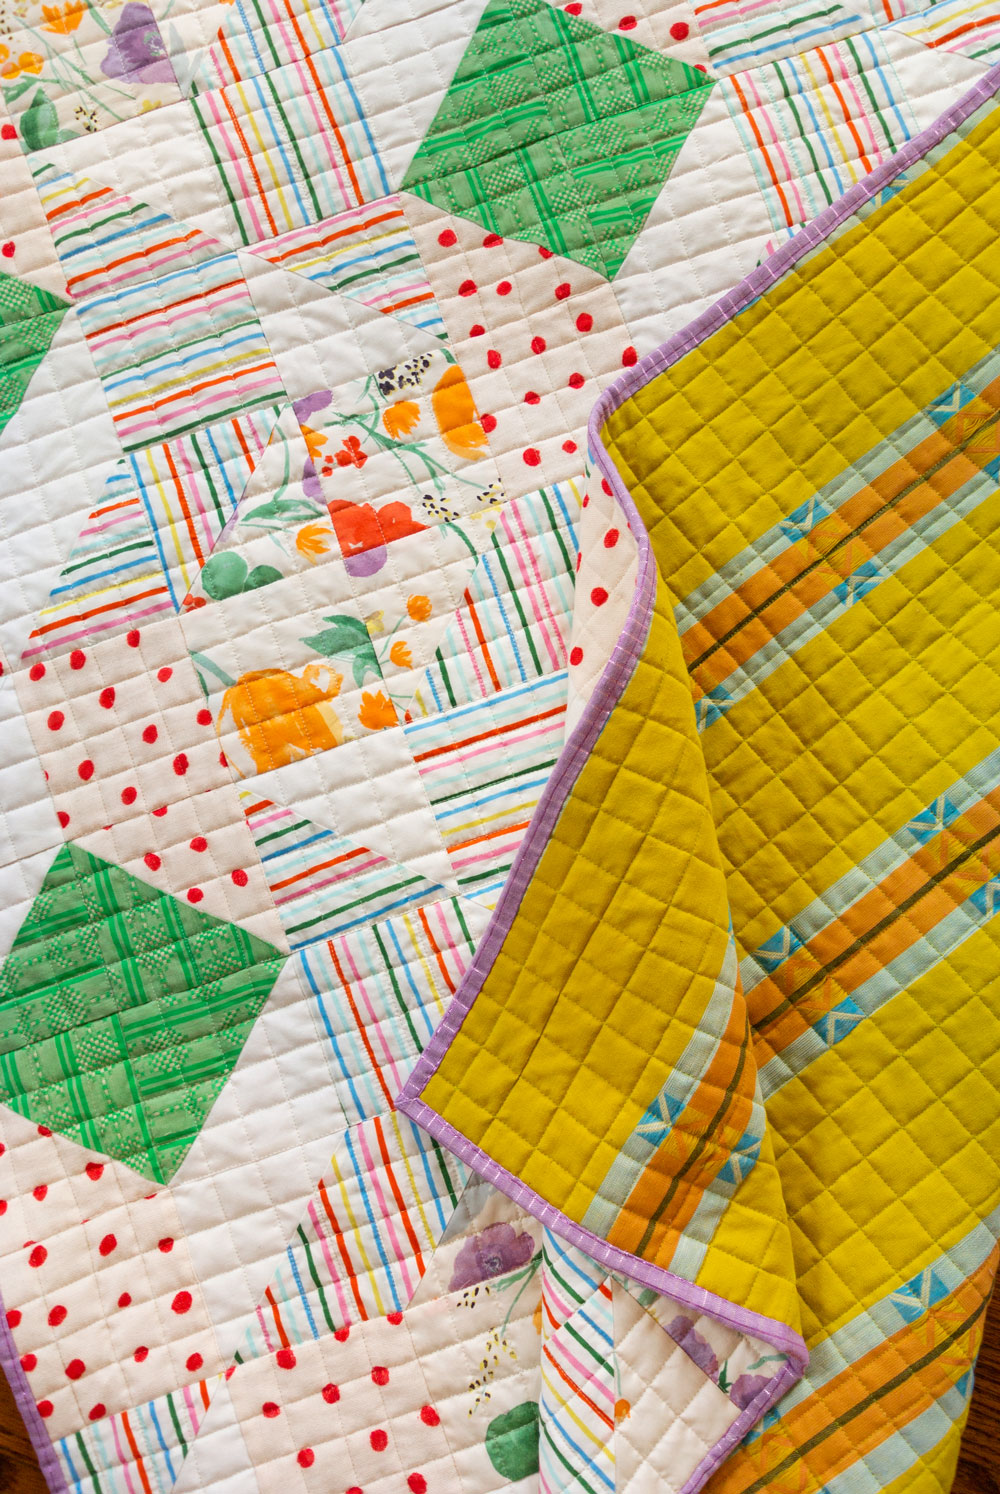 Learn the 6 simple steps to straight line quilting, or as some call it, matchstick quilting. This is a great beginner quilter tutorial!